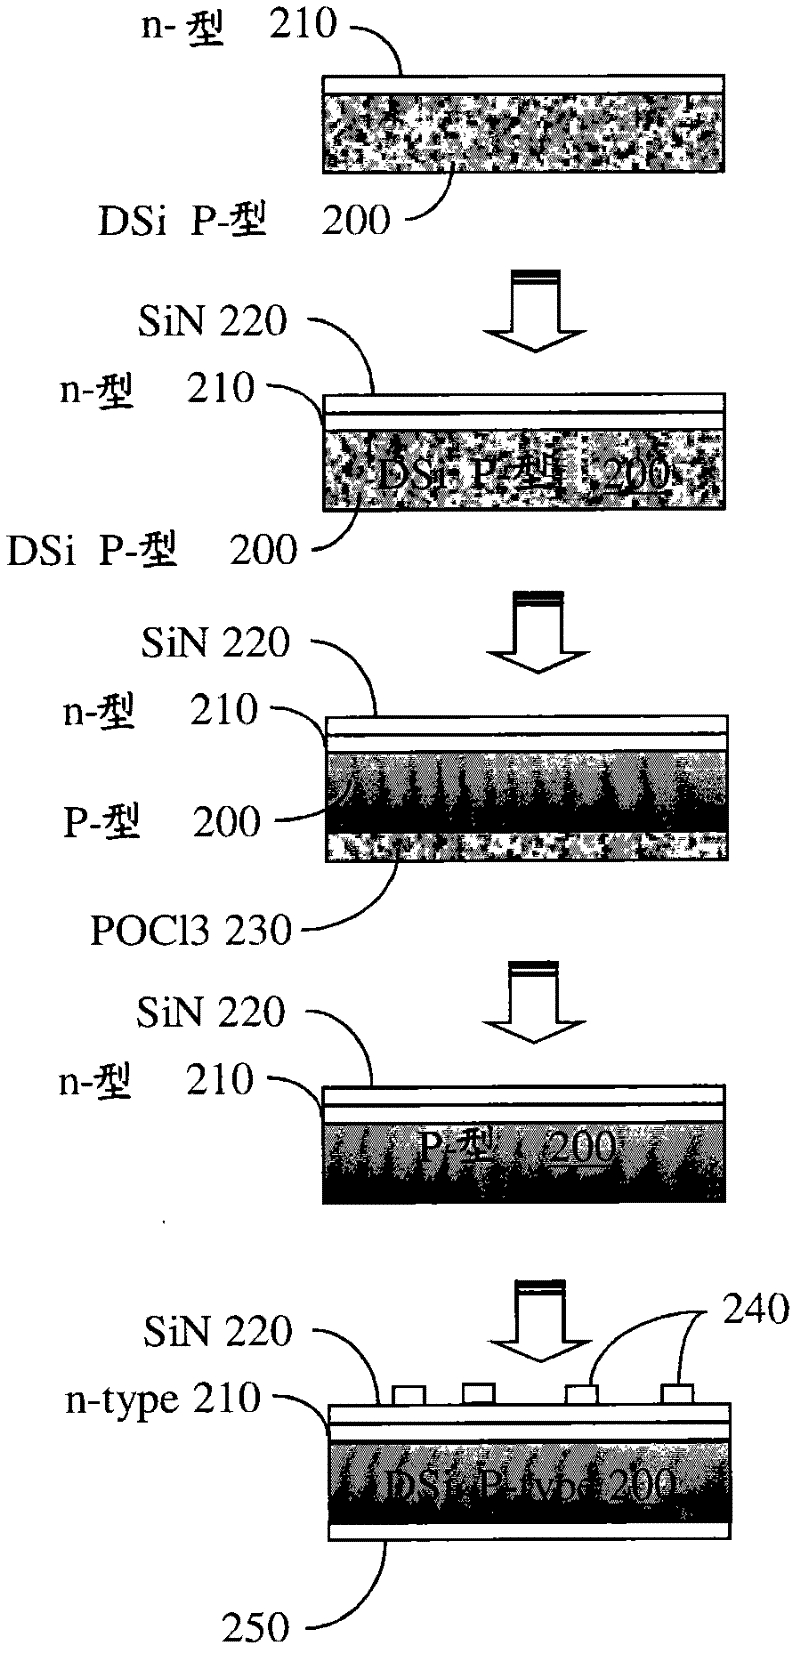 Low-cost solar cells and methods for fabricating low cost substrates for solar cells